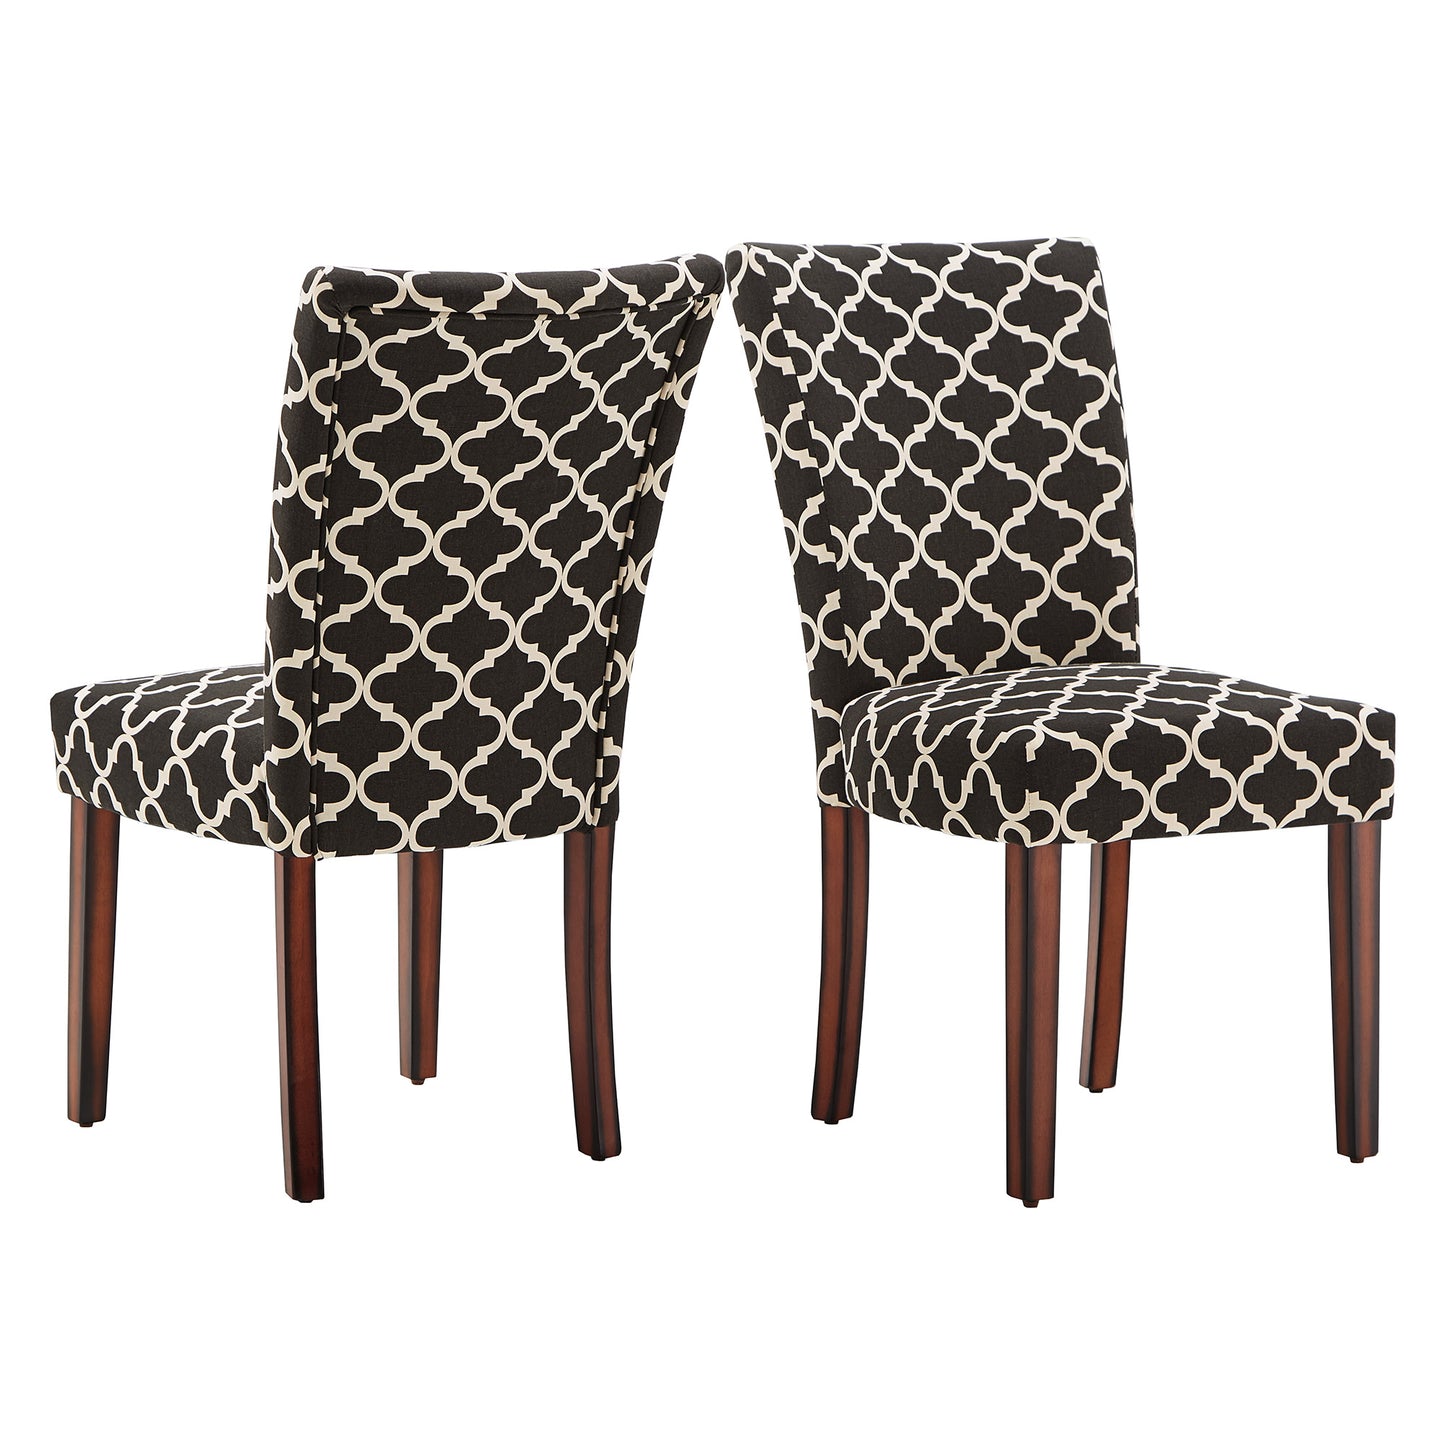 Moroccan Pattern Fabric Parsons Dining Chairs (Set of 2) - Vulcan Black